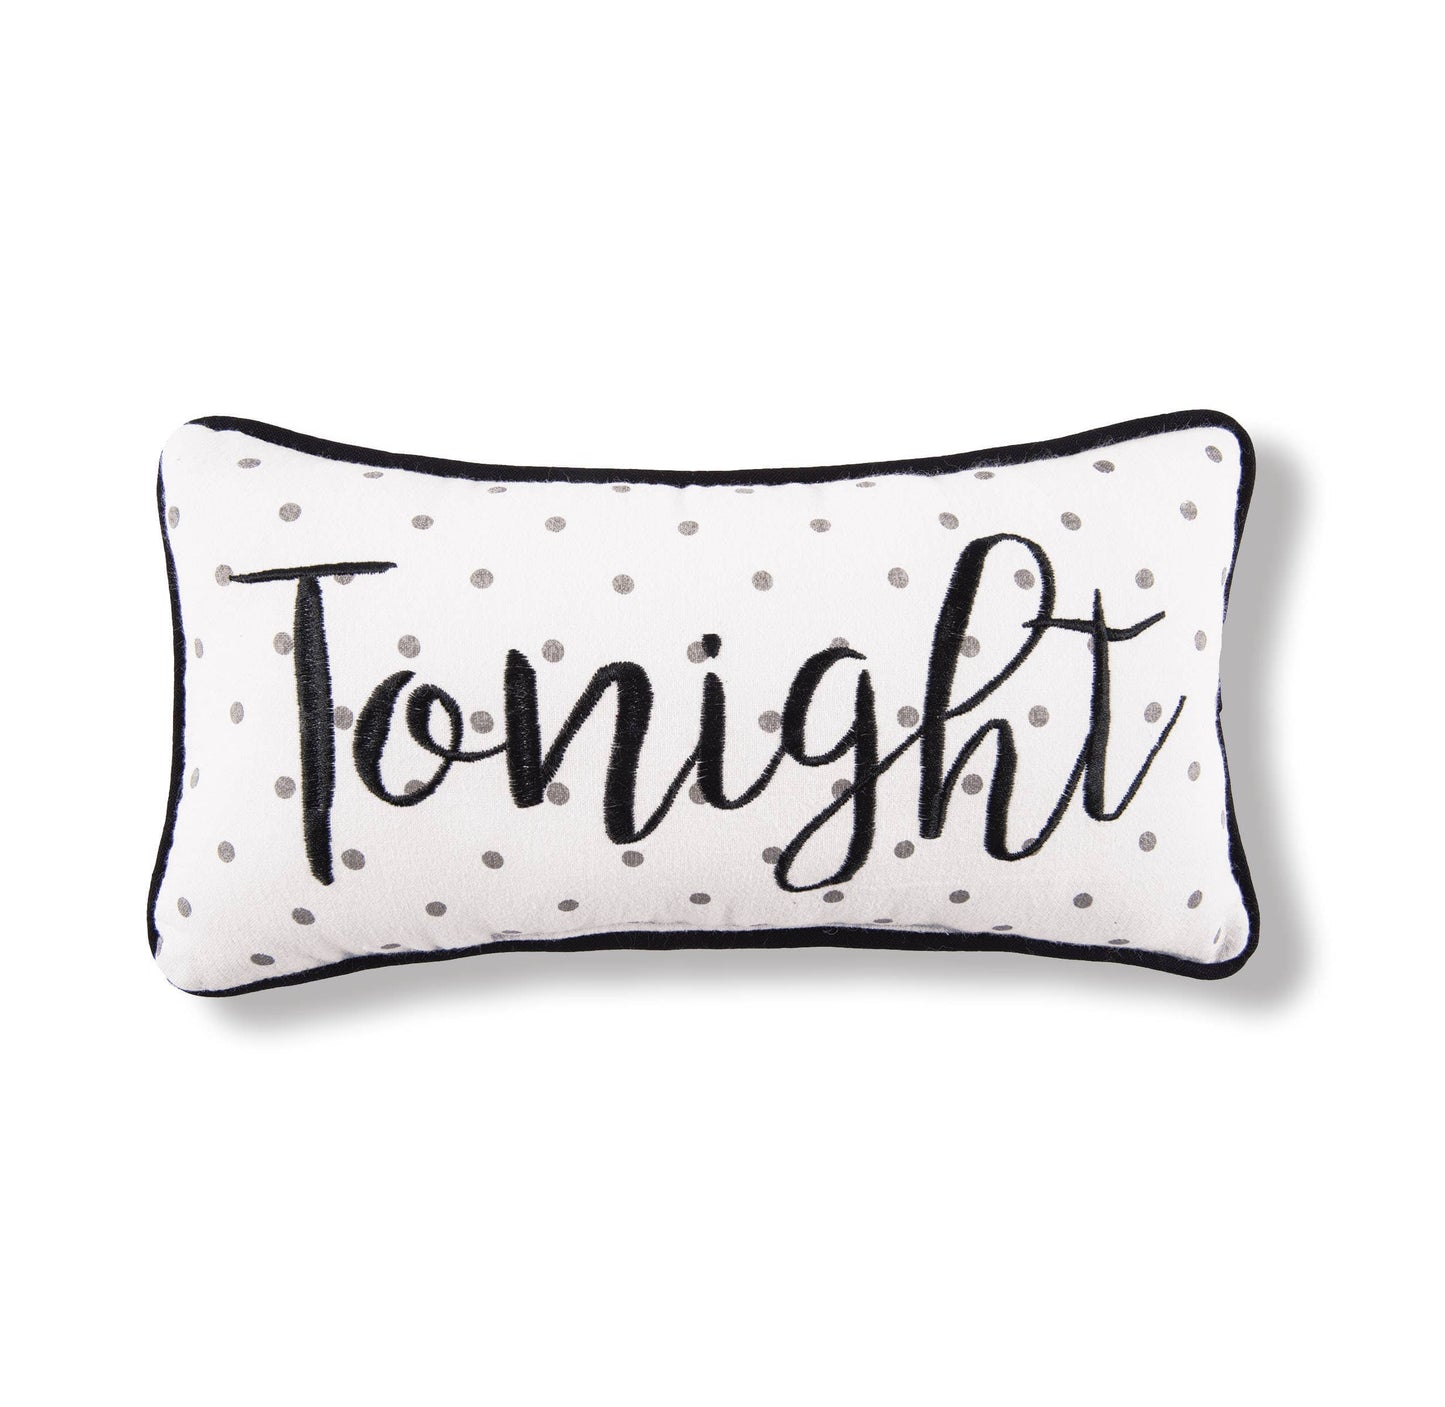 Tonight / Not Tonight Embroidered 6 x 12 Pillow